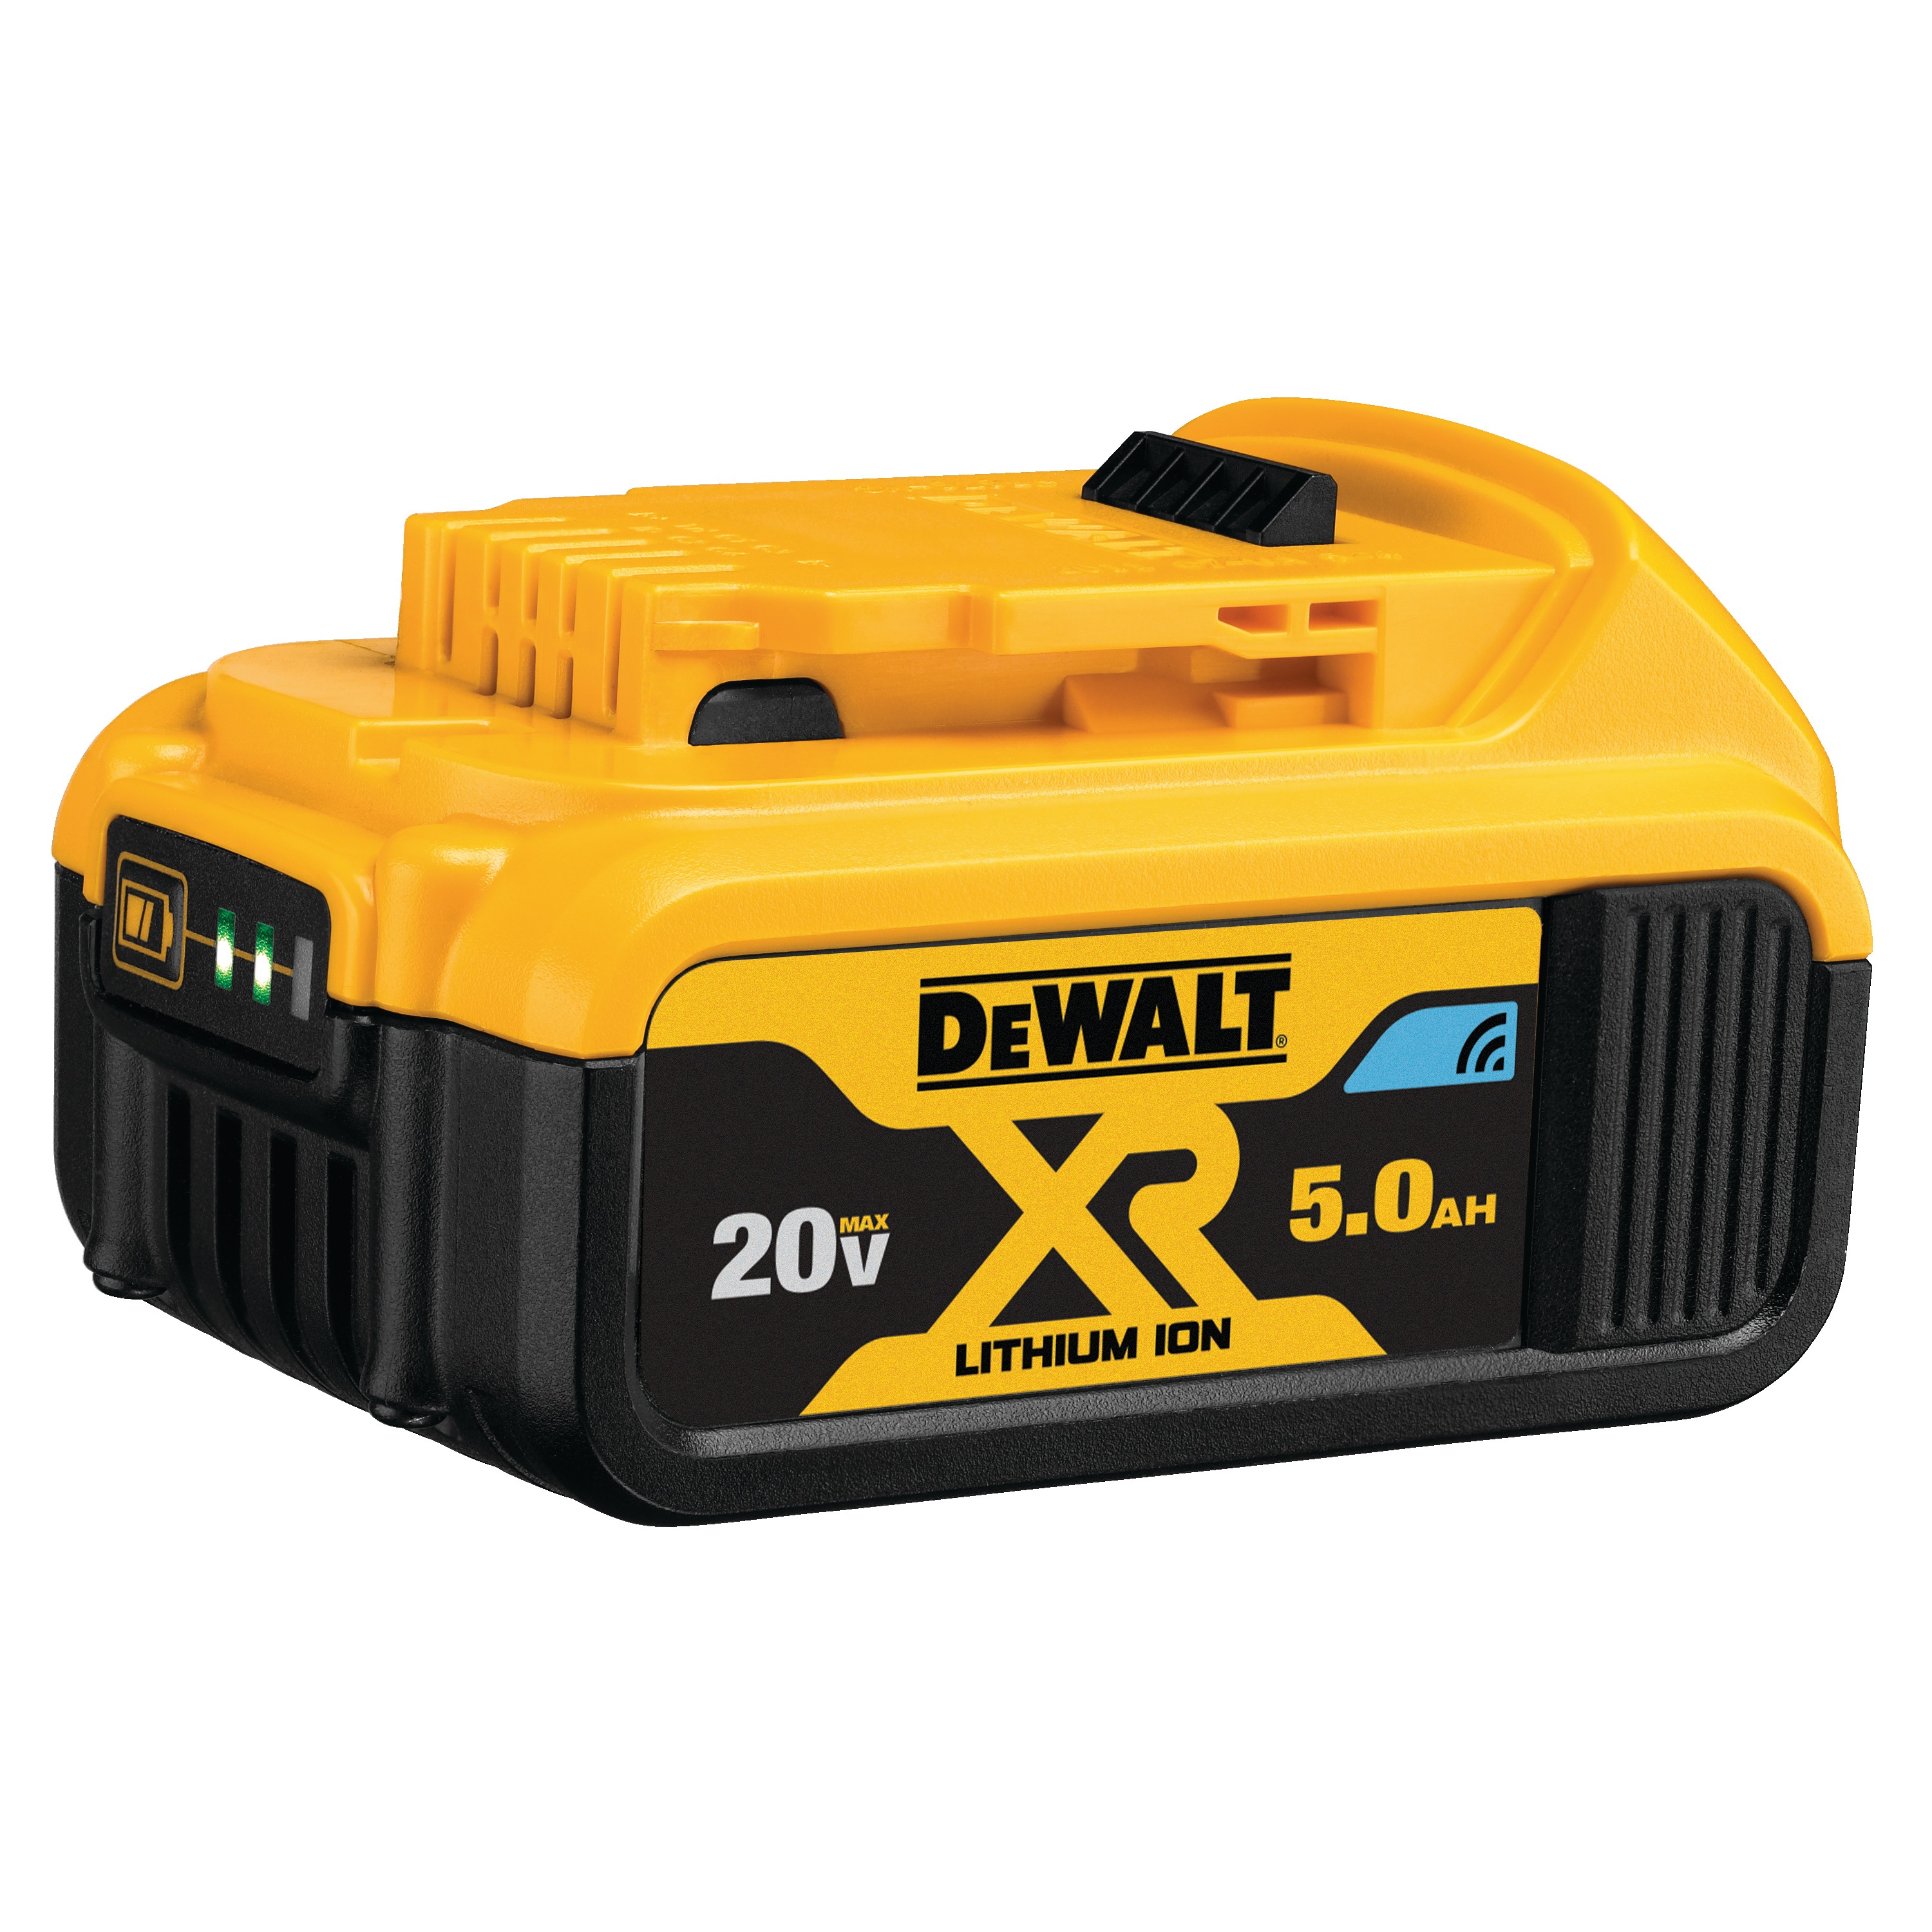 20 Volt Tool Connect 5 AMP hours Battery with two lit up LED gauges